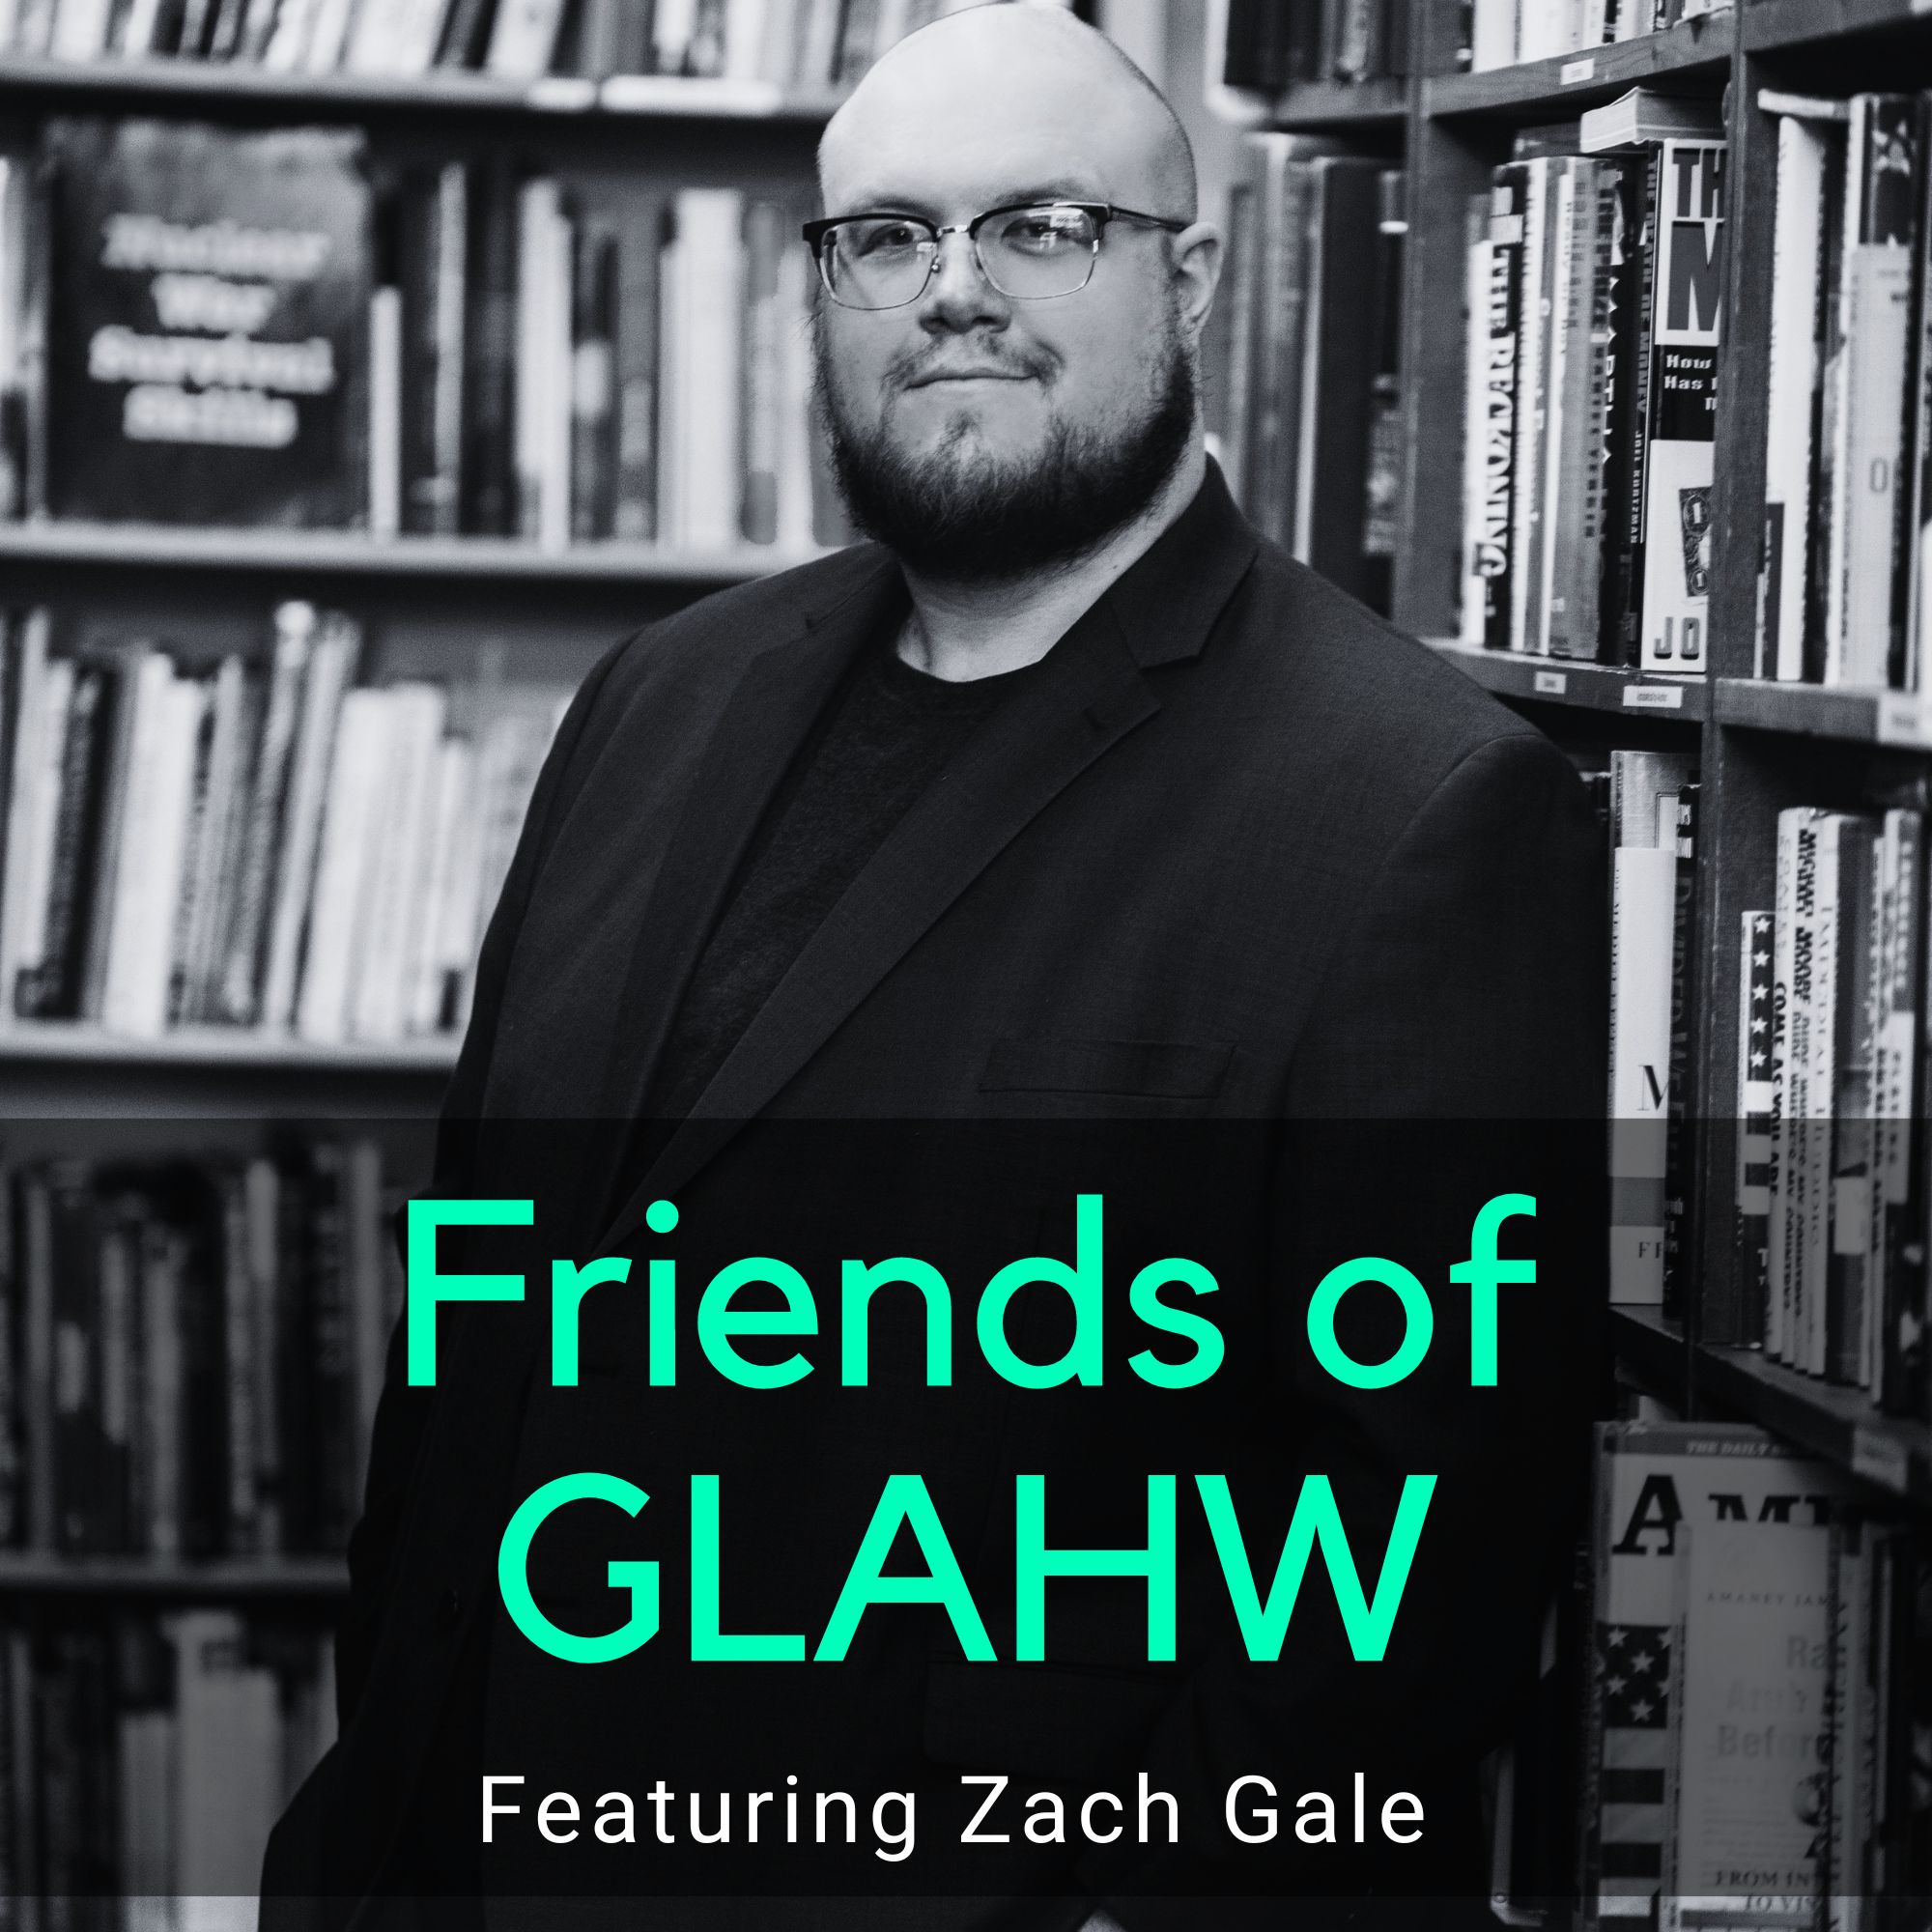 Friends of GLAHW feat. Zach Gale title card